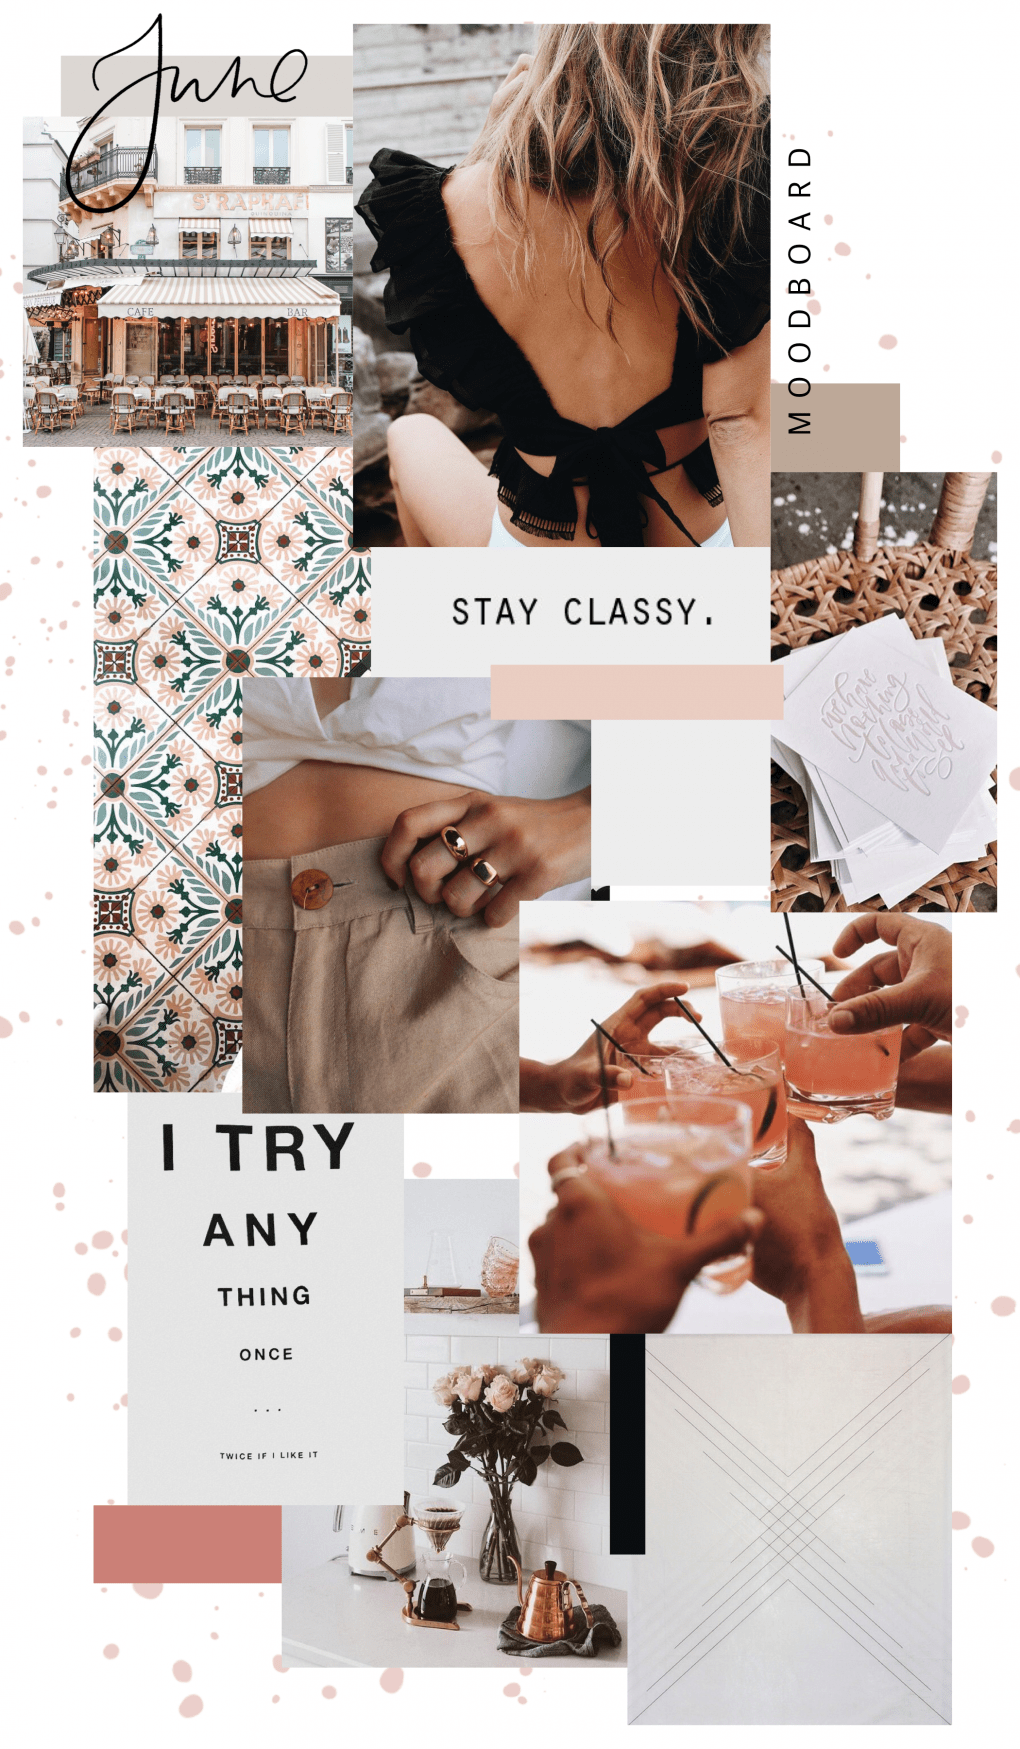 June Moodboard - Stay classy, try anything once.<ref> Collage</ref><box>(10,11),(983,987)</box> of images including a girl in a black top, a pink drink, a handbag and a building. - July, June